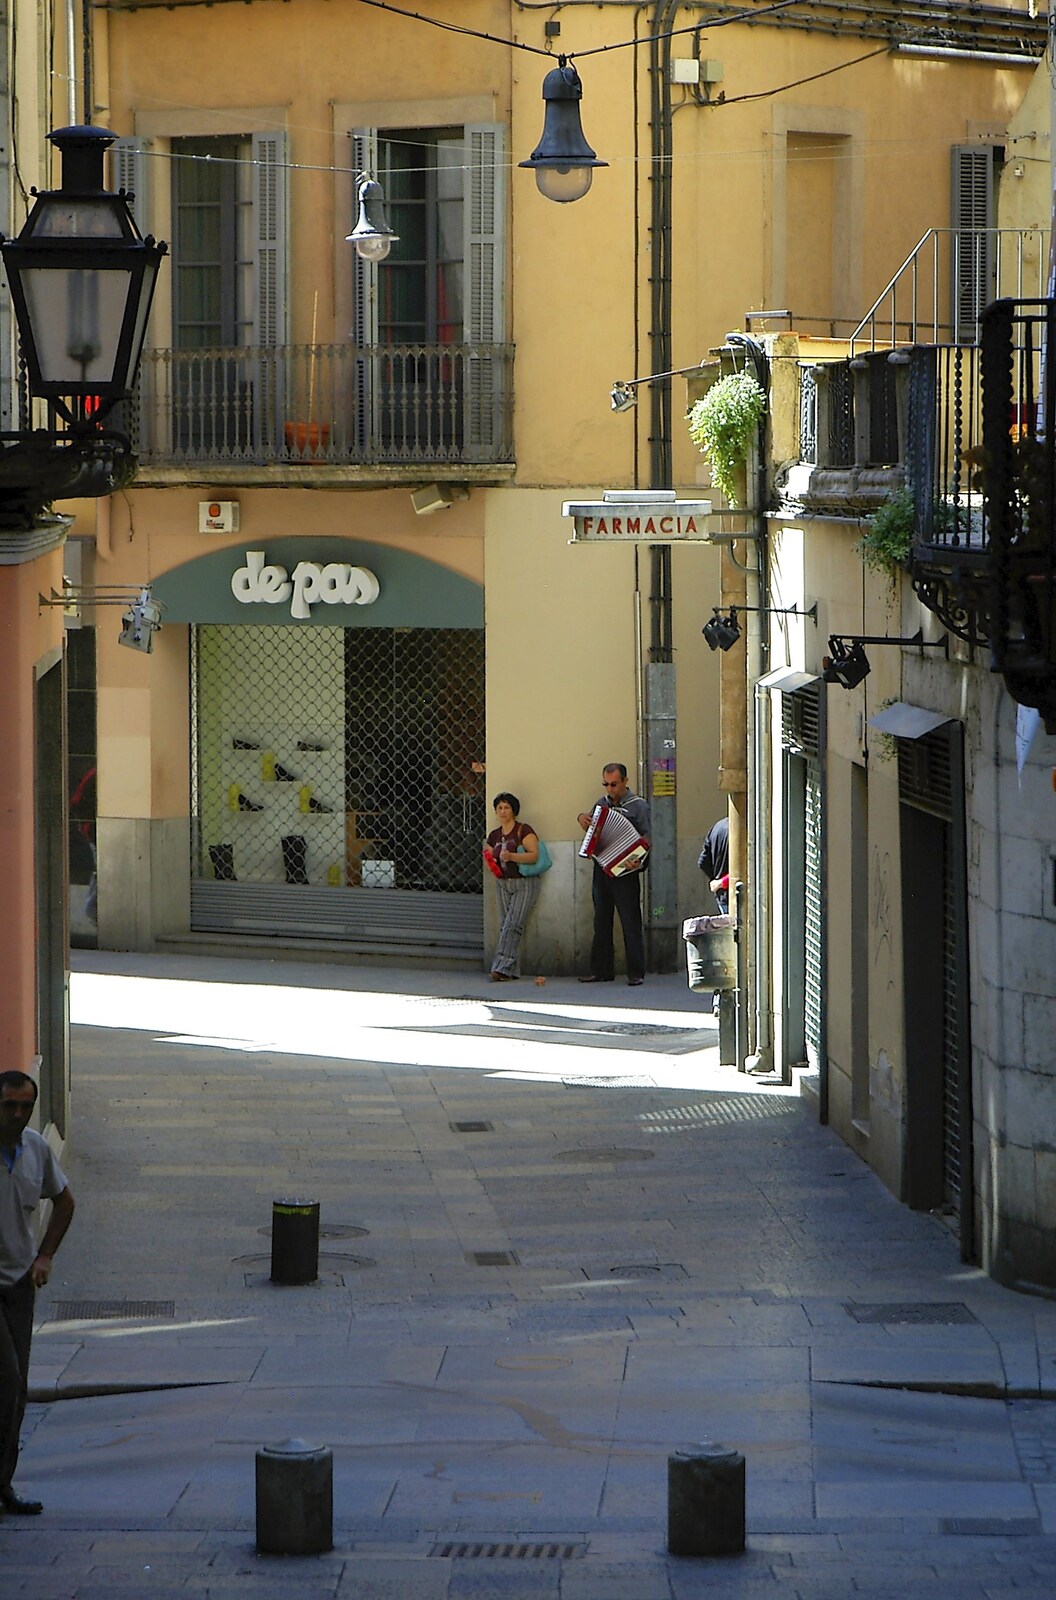 Buskers fill the quiet streets with music from Girona, Catalunya, Spain - 17th September 2006